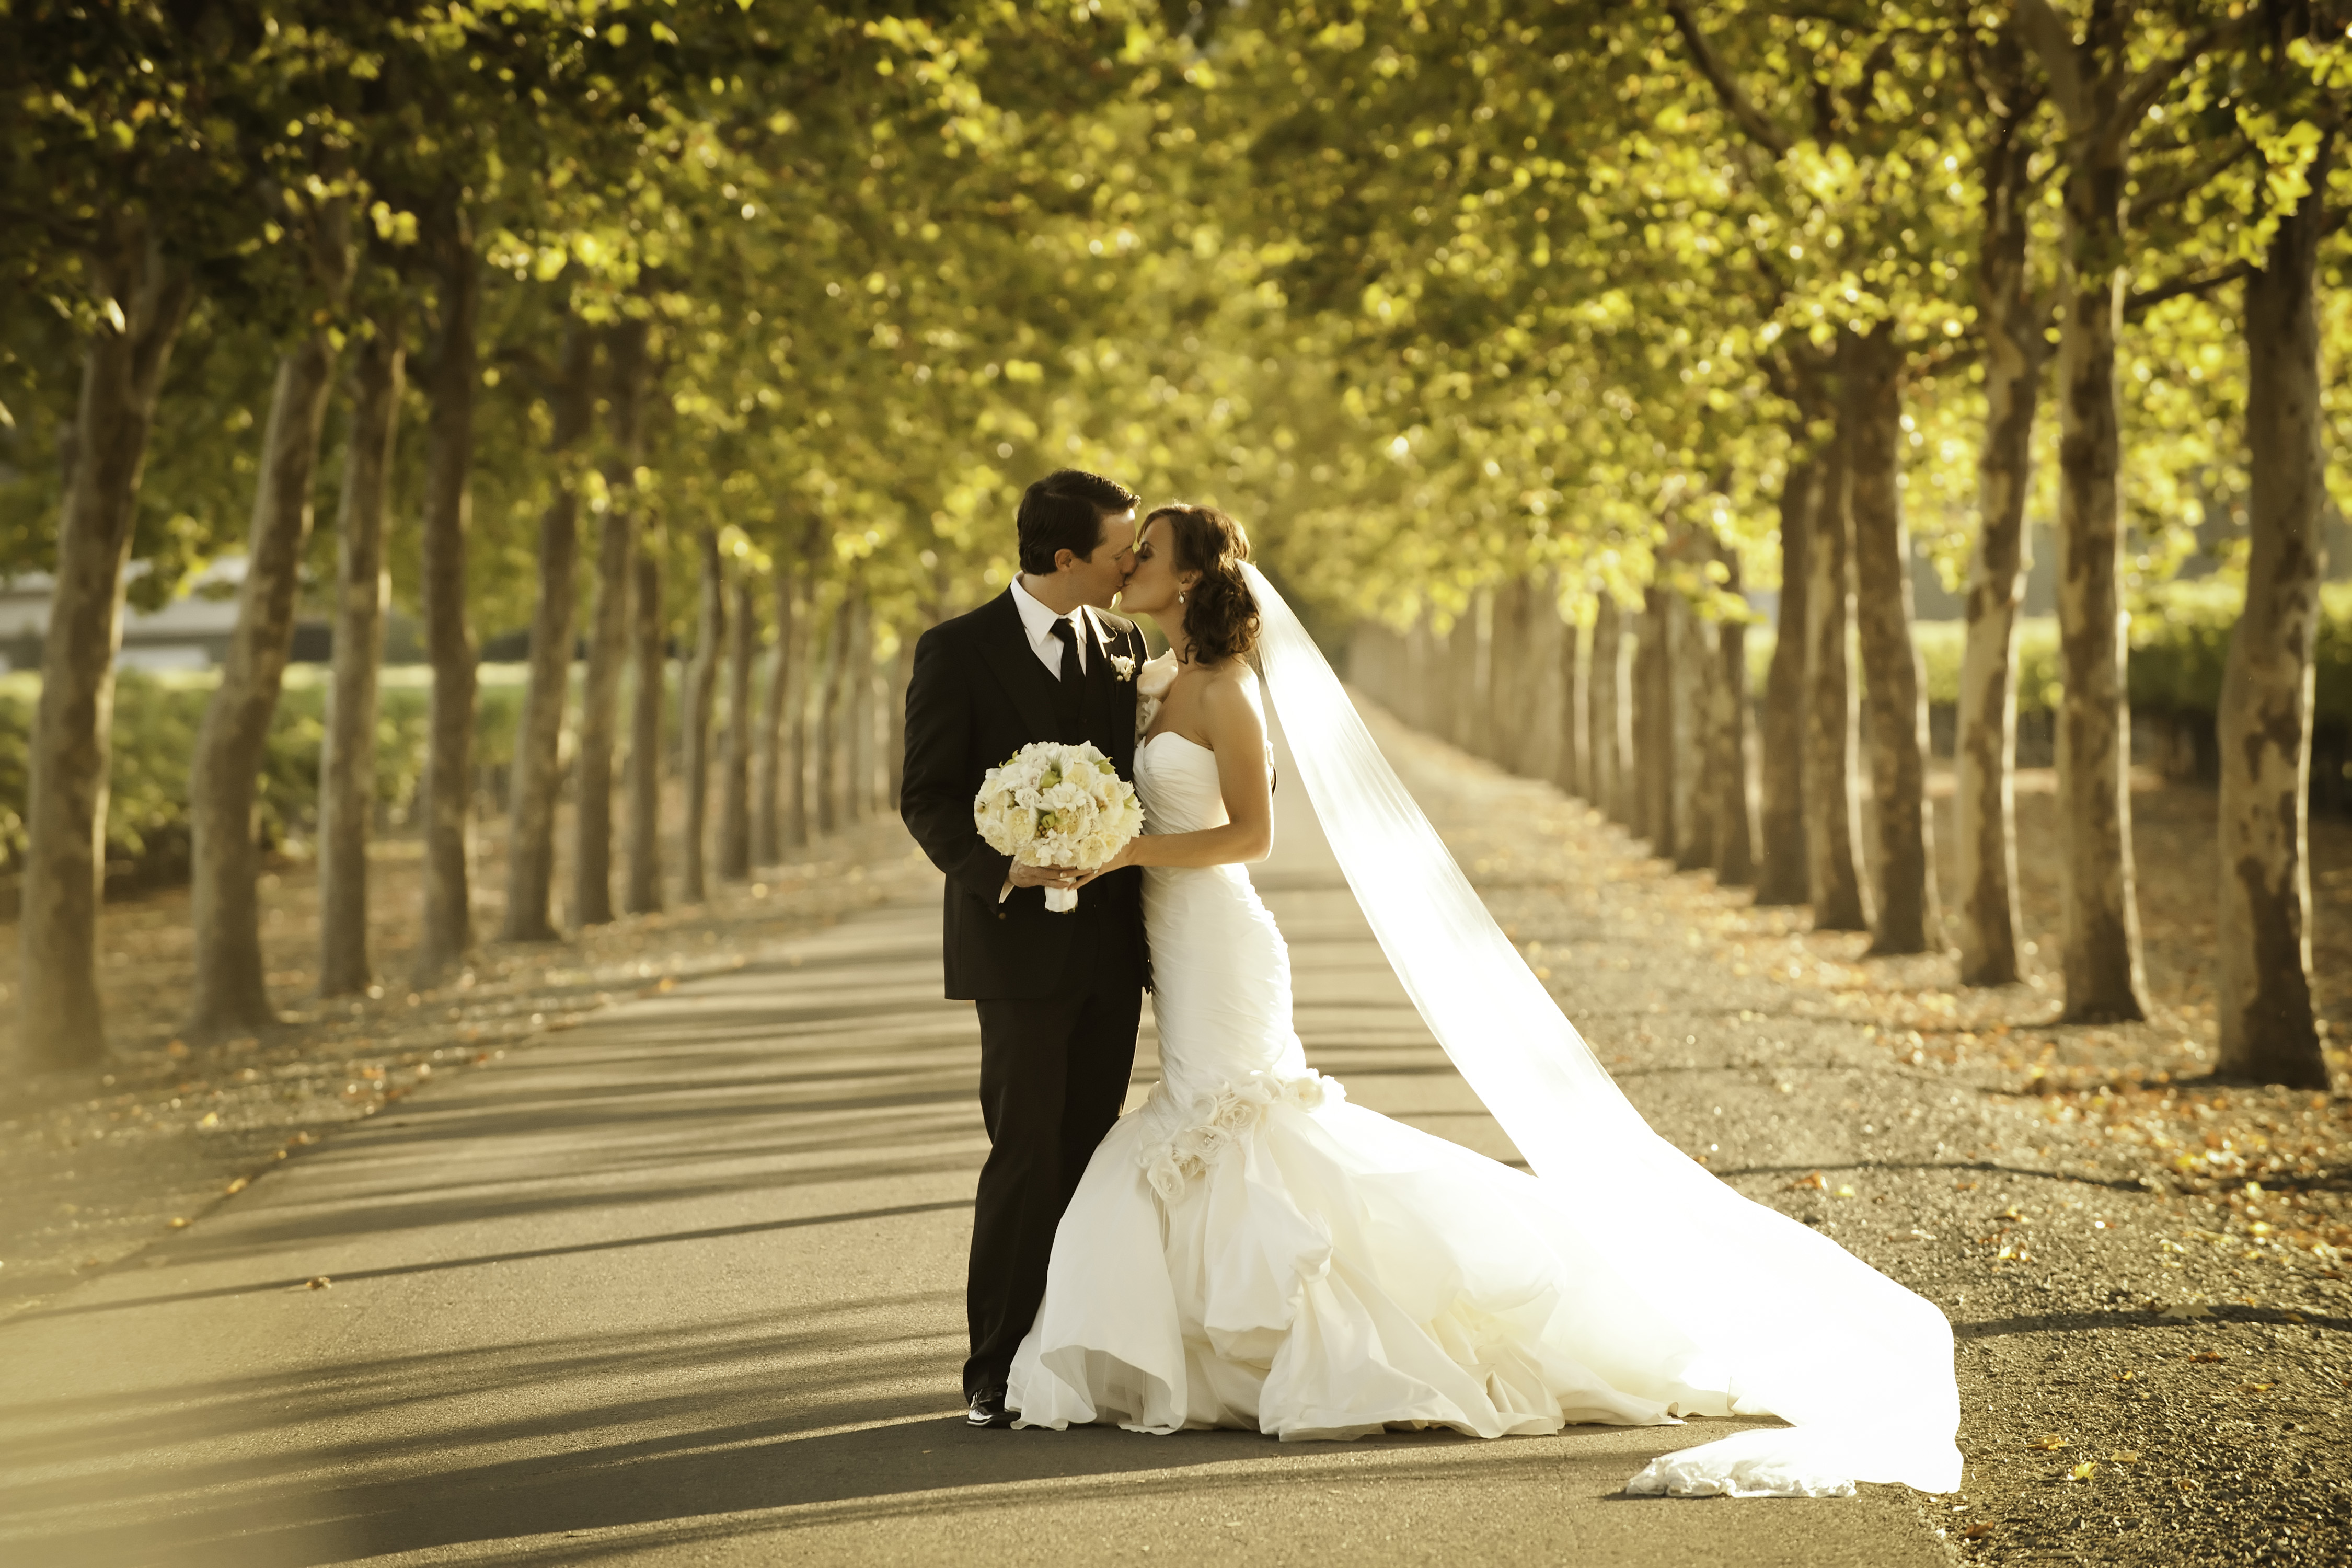 Nice Images Collection: Wedding Desktop Wallpapers